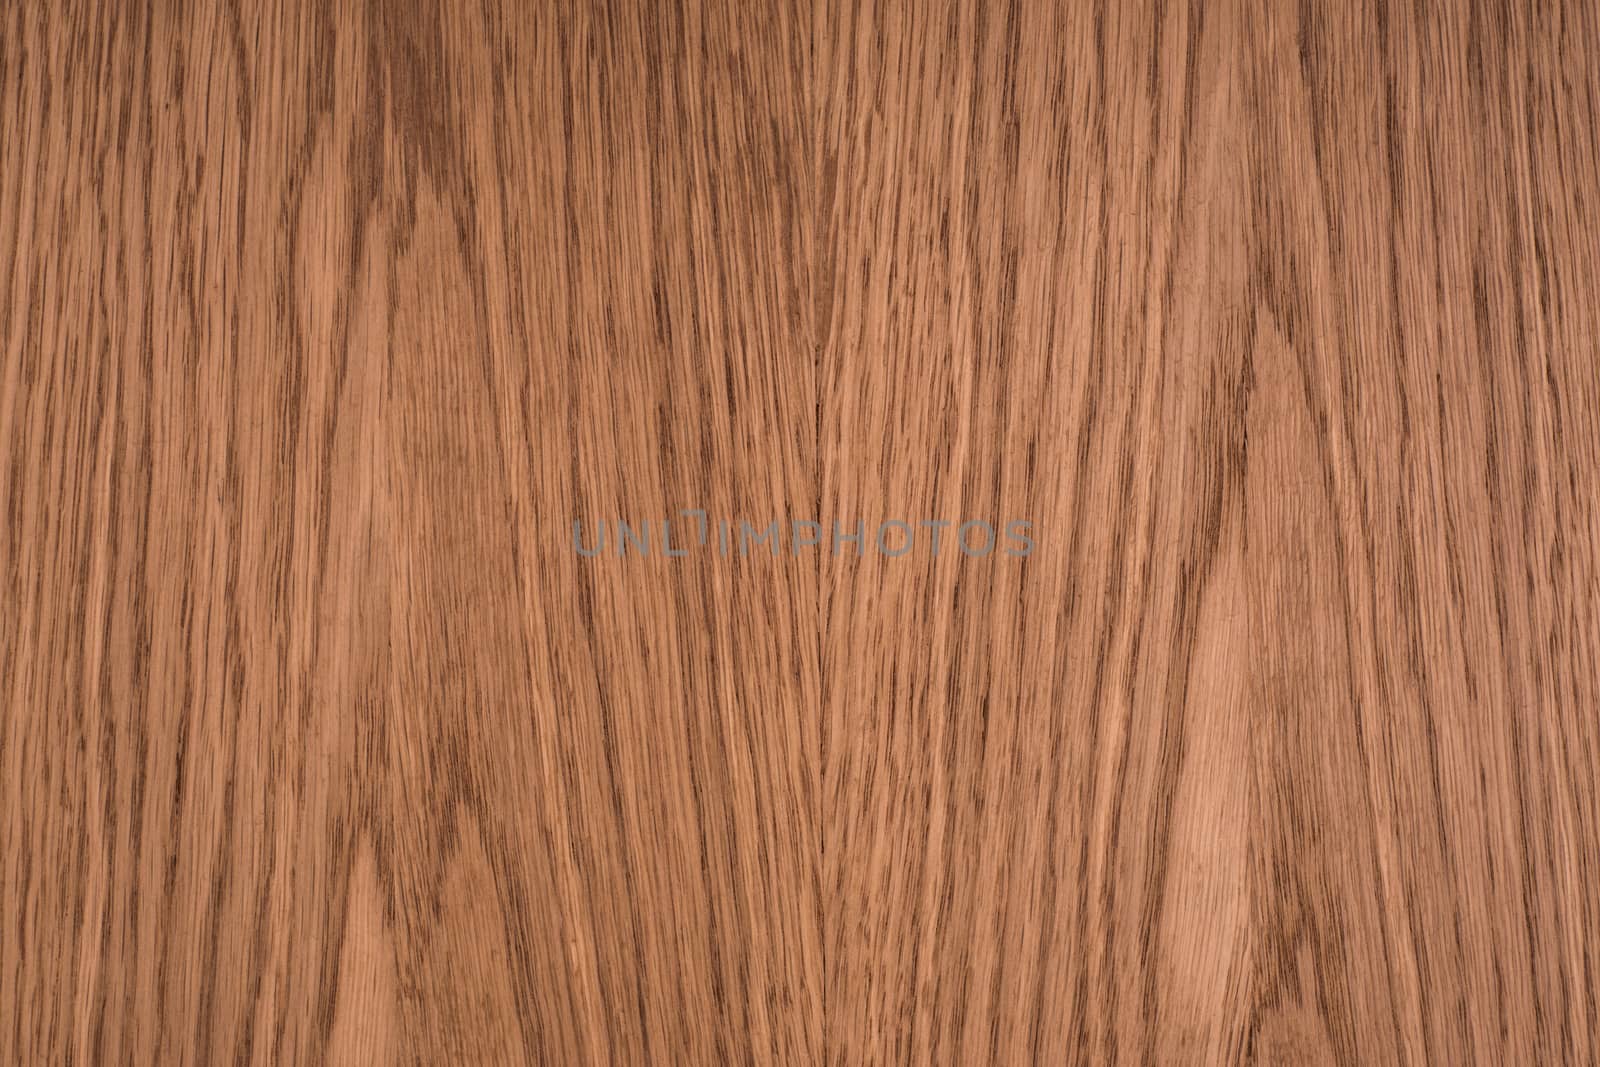 wood texture with natural pattern. Abstract background, empty template.